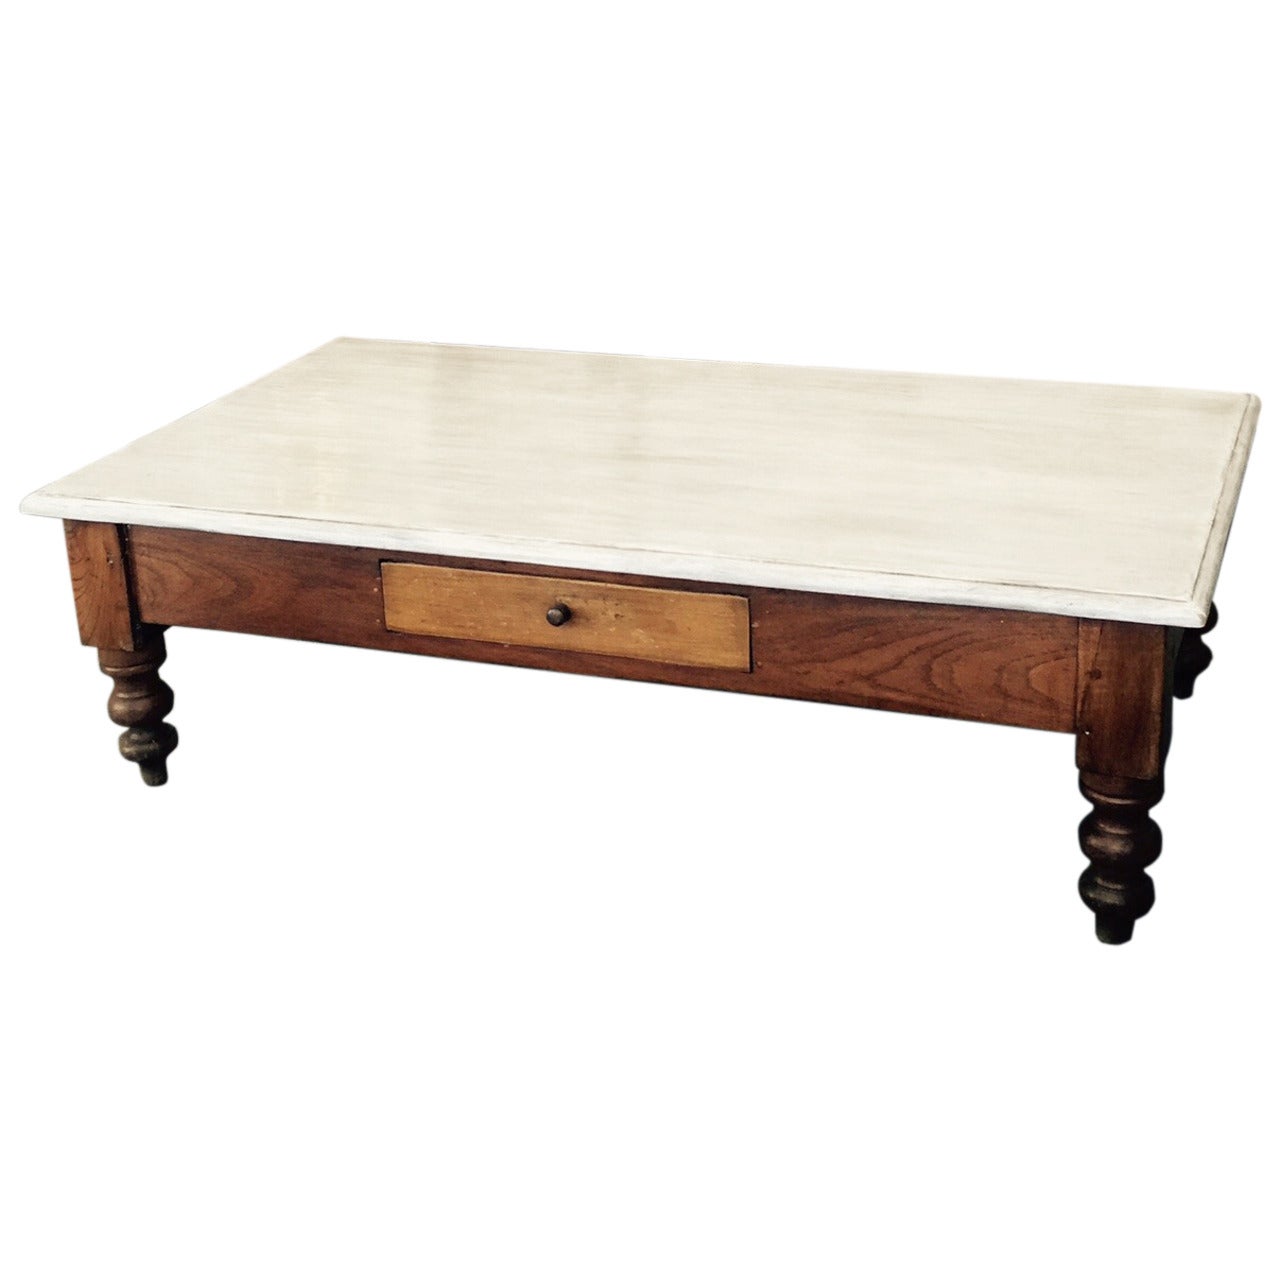 Early 20th Century Italian Wood Coffee Table with Painted Top & Stained Base For Sale